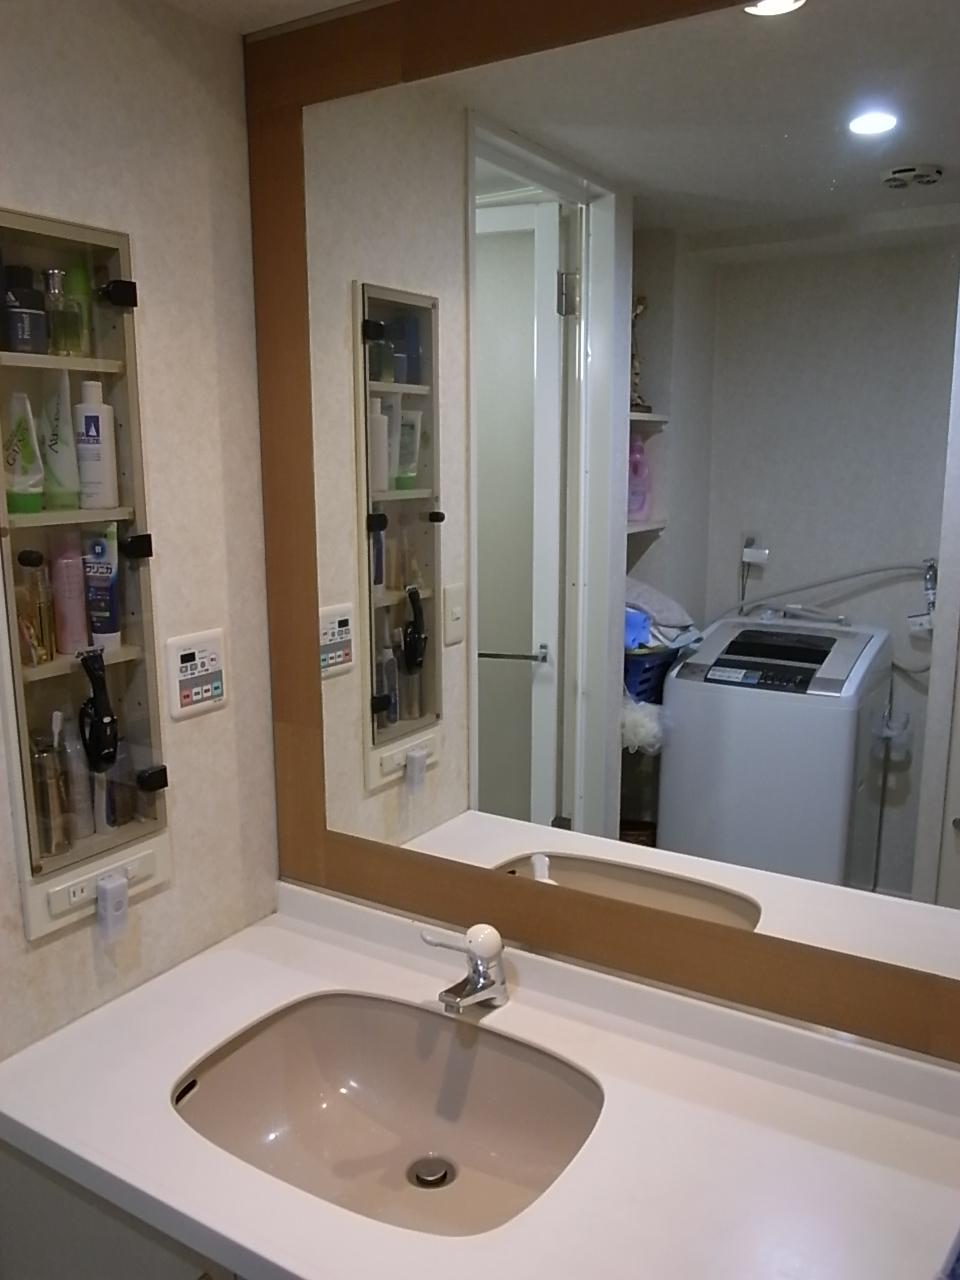 Wash basin, toilet. There is also bidet feature in restroom